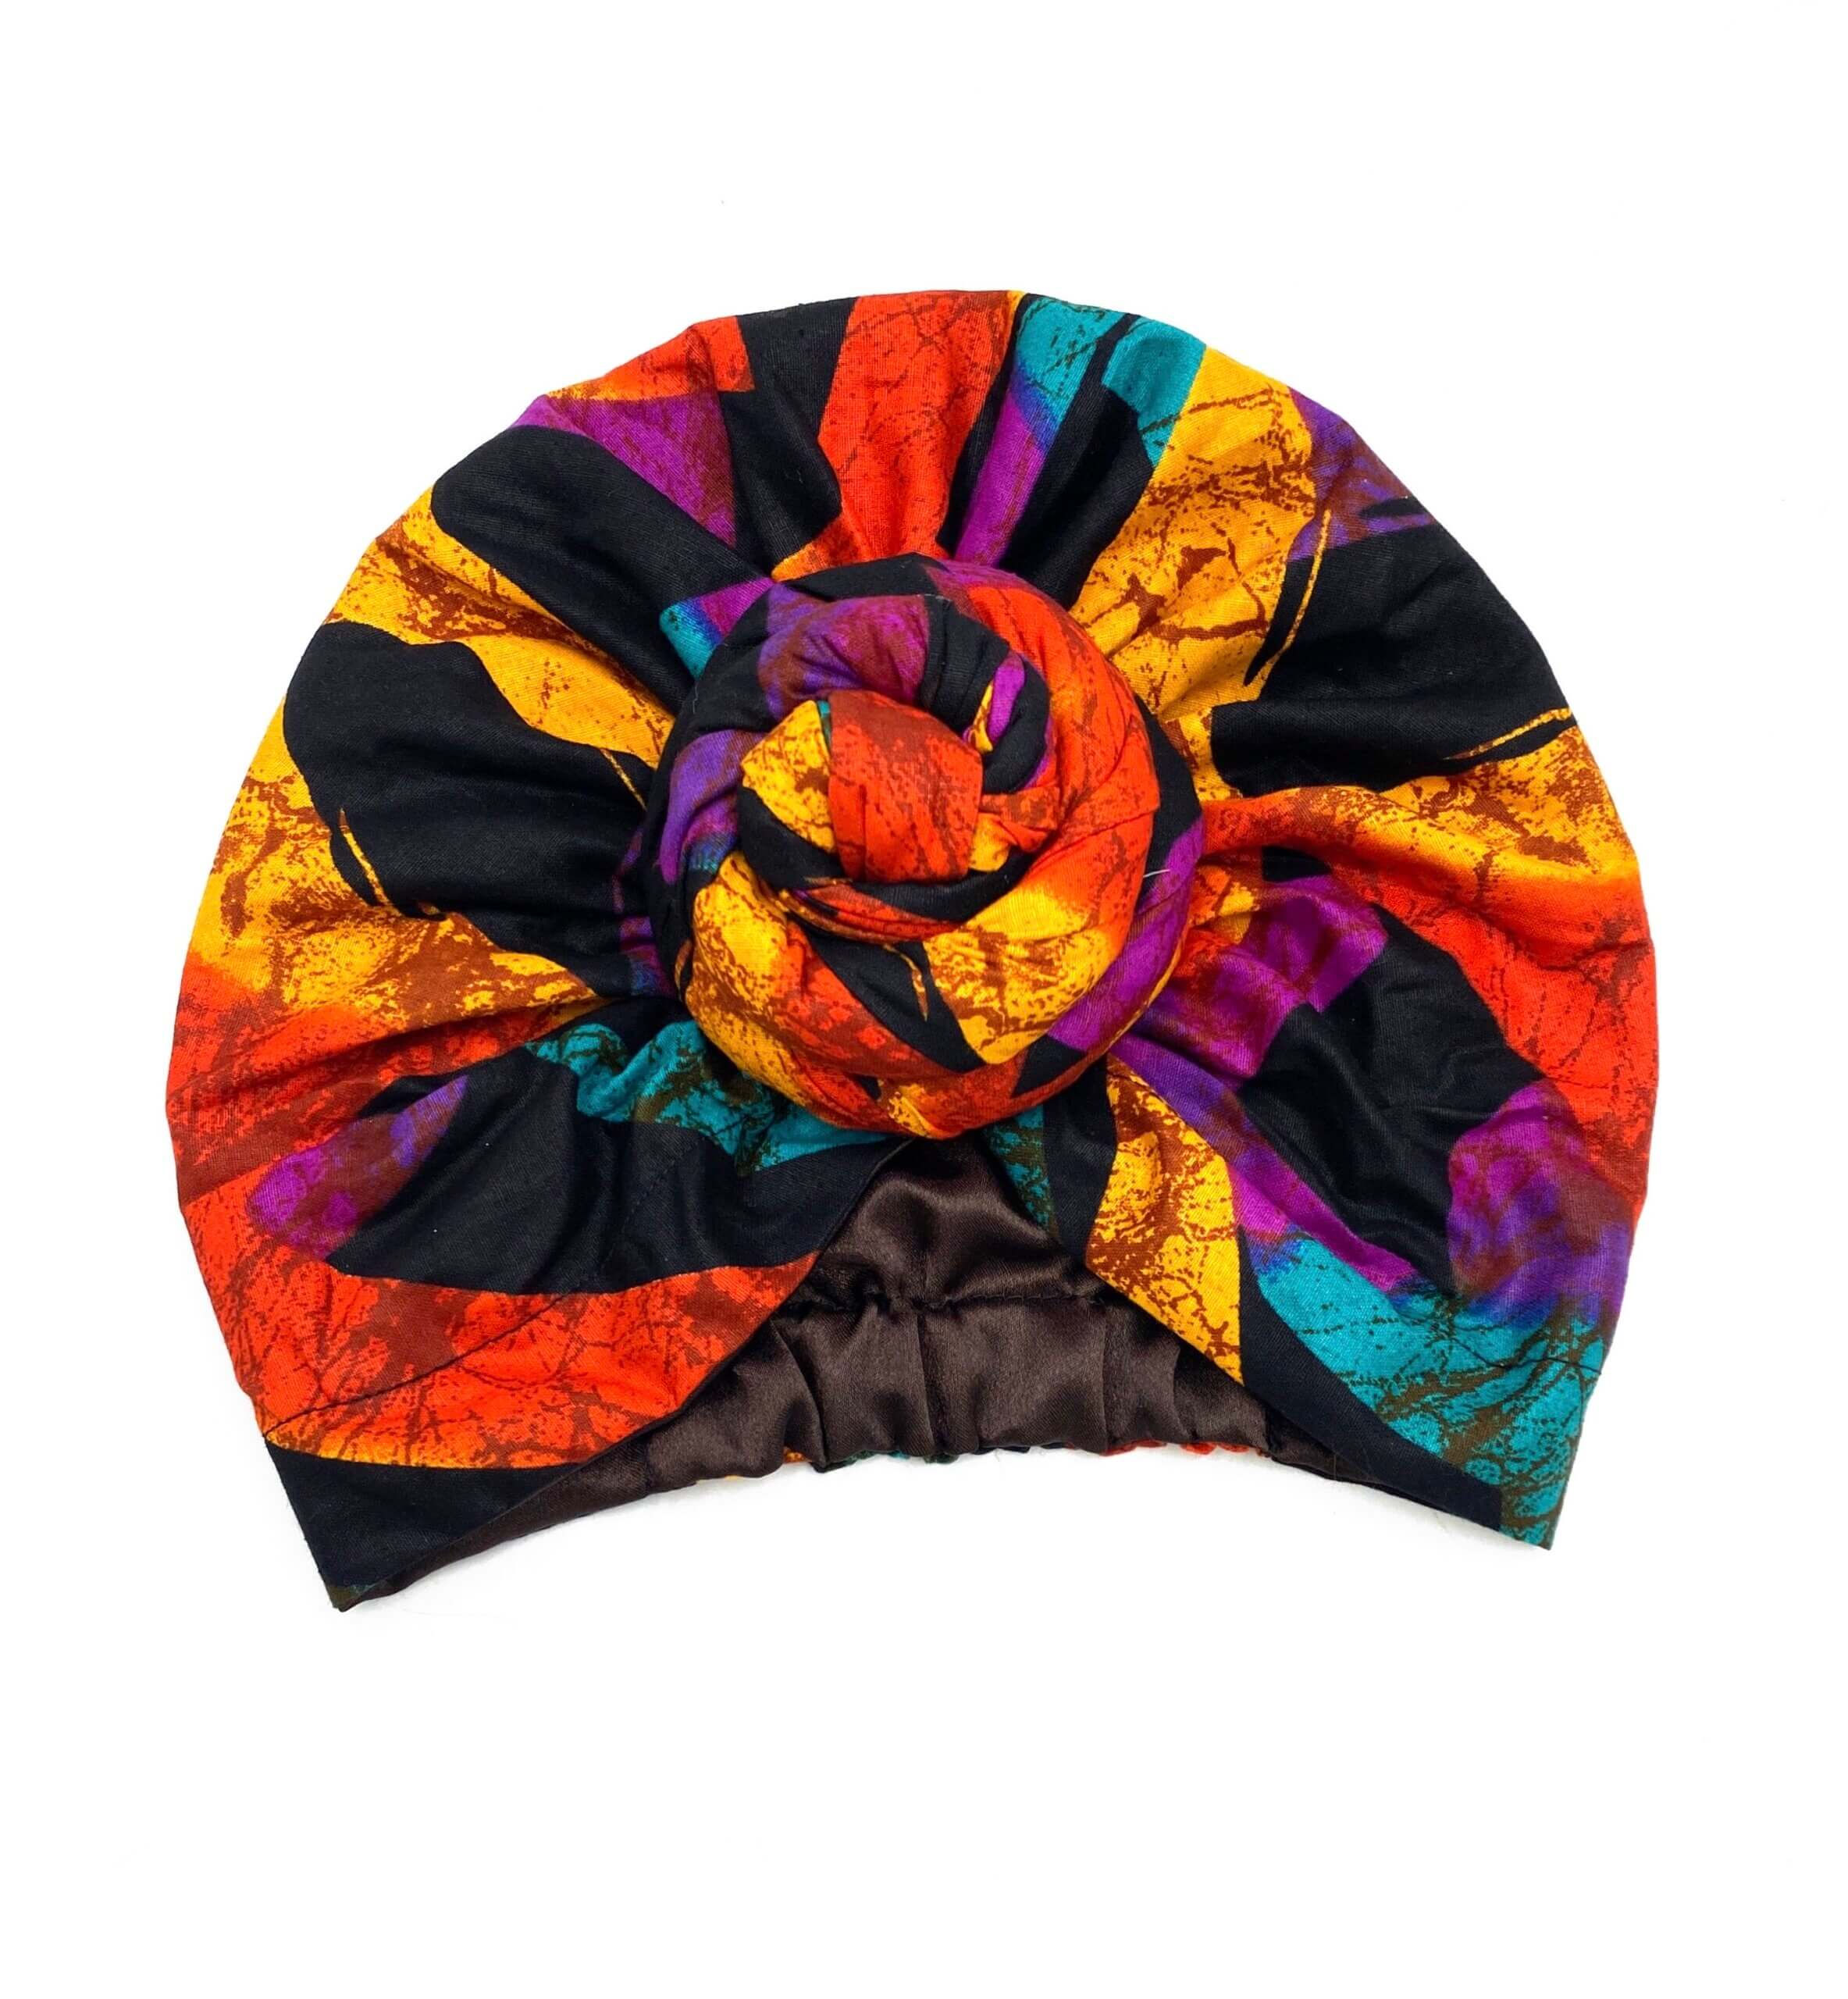 Satin lined Pretied headwrap